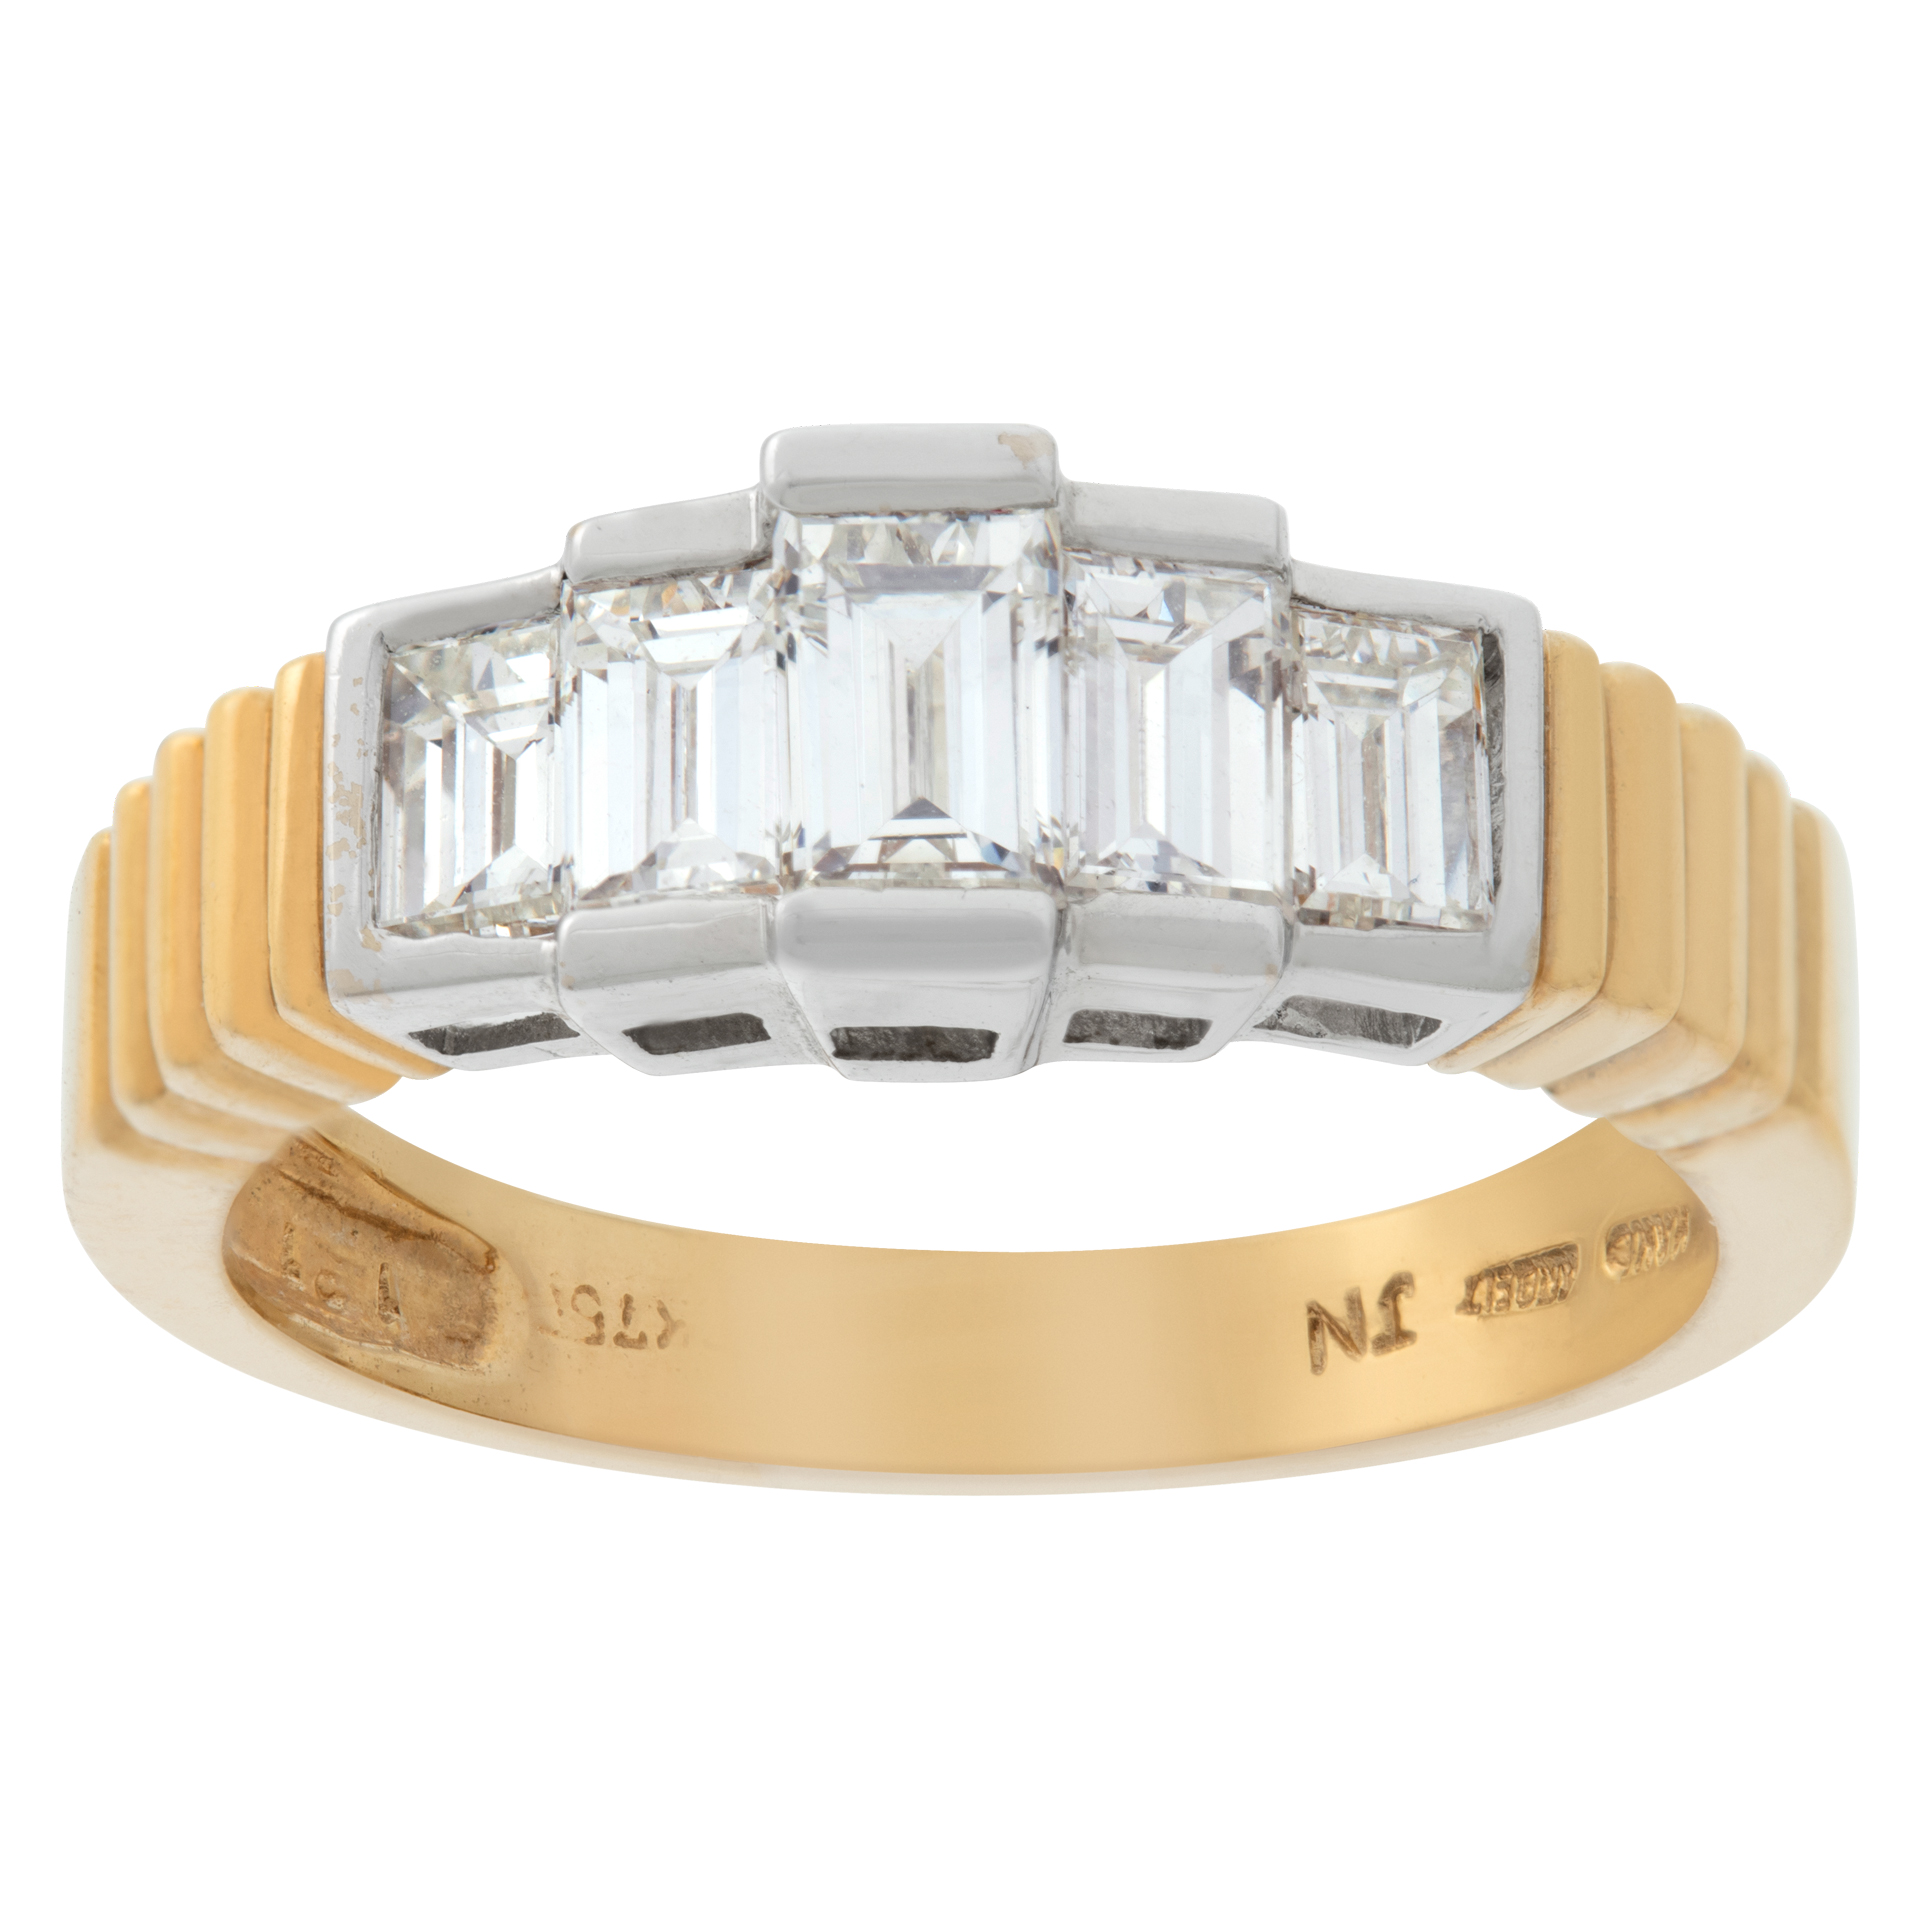 Emerald cut channel set diamond ring with 5 diamonds 18k white and yellow gold image 1